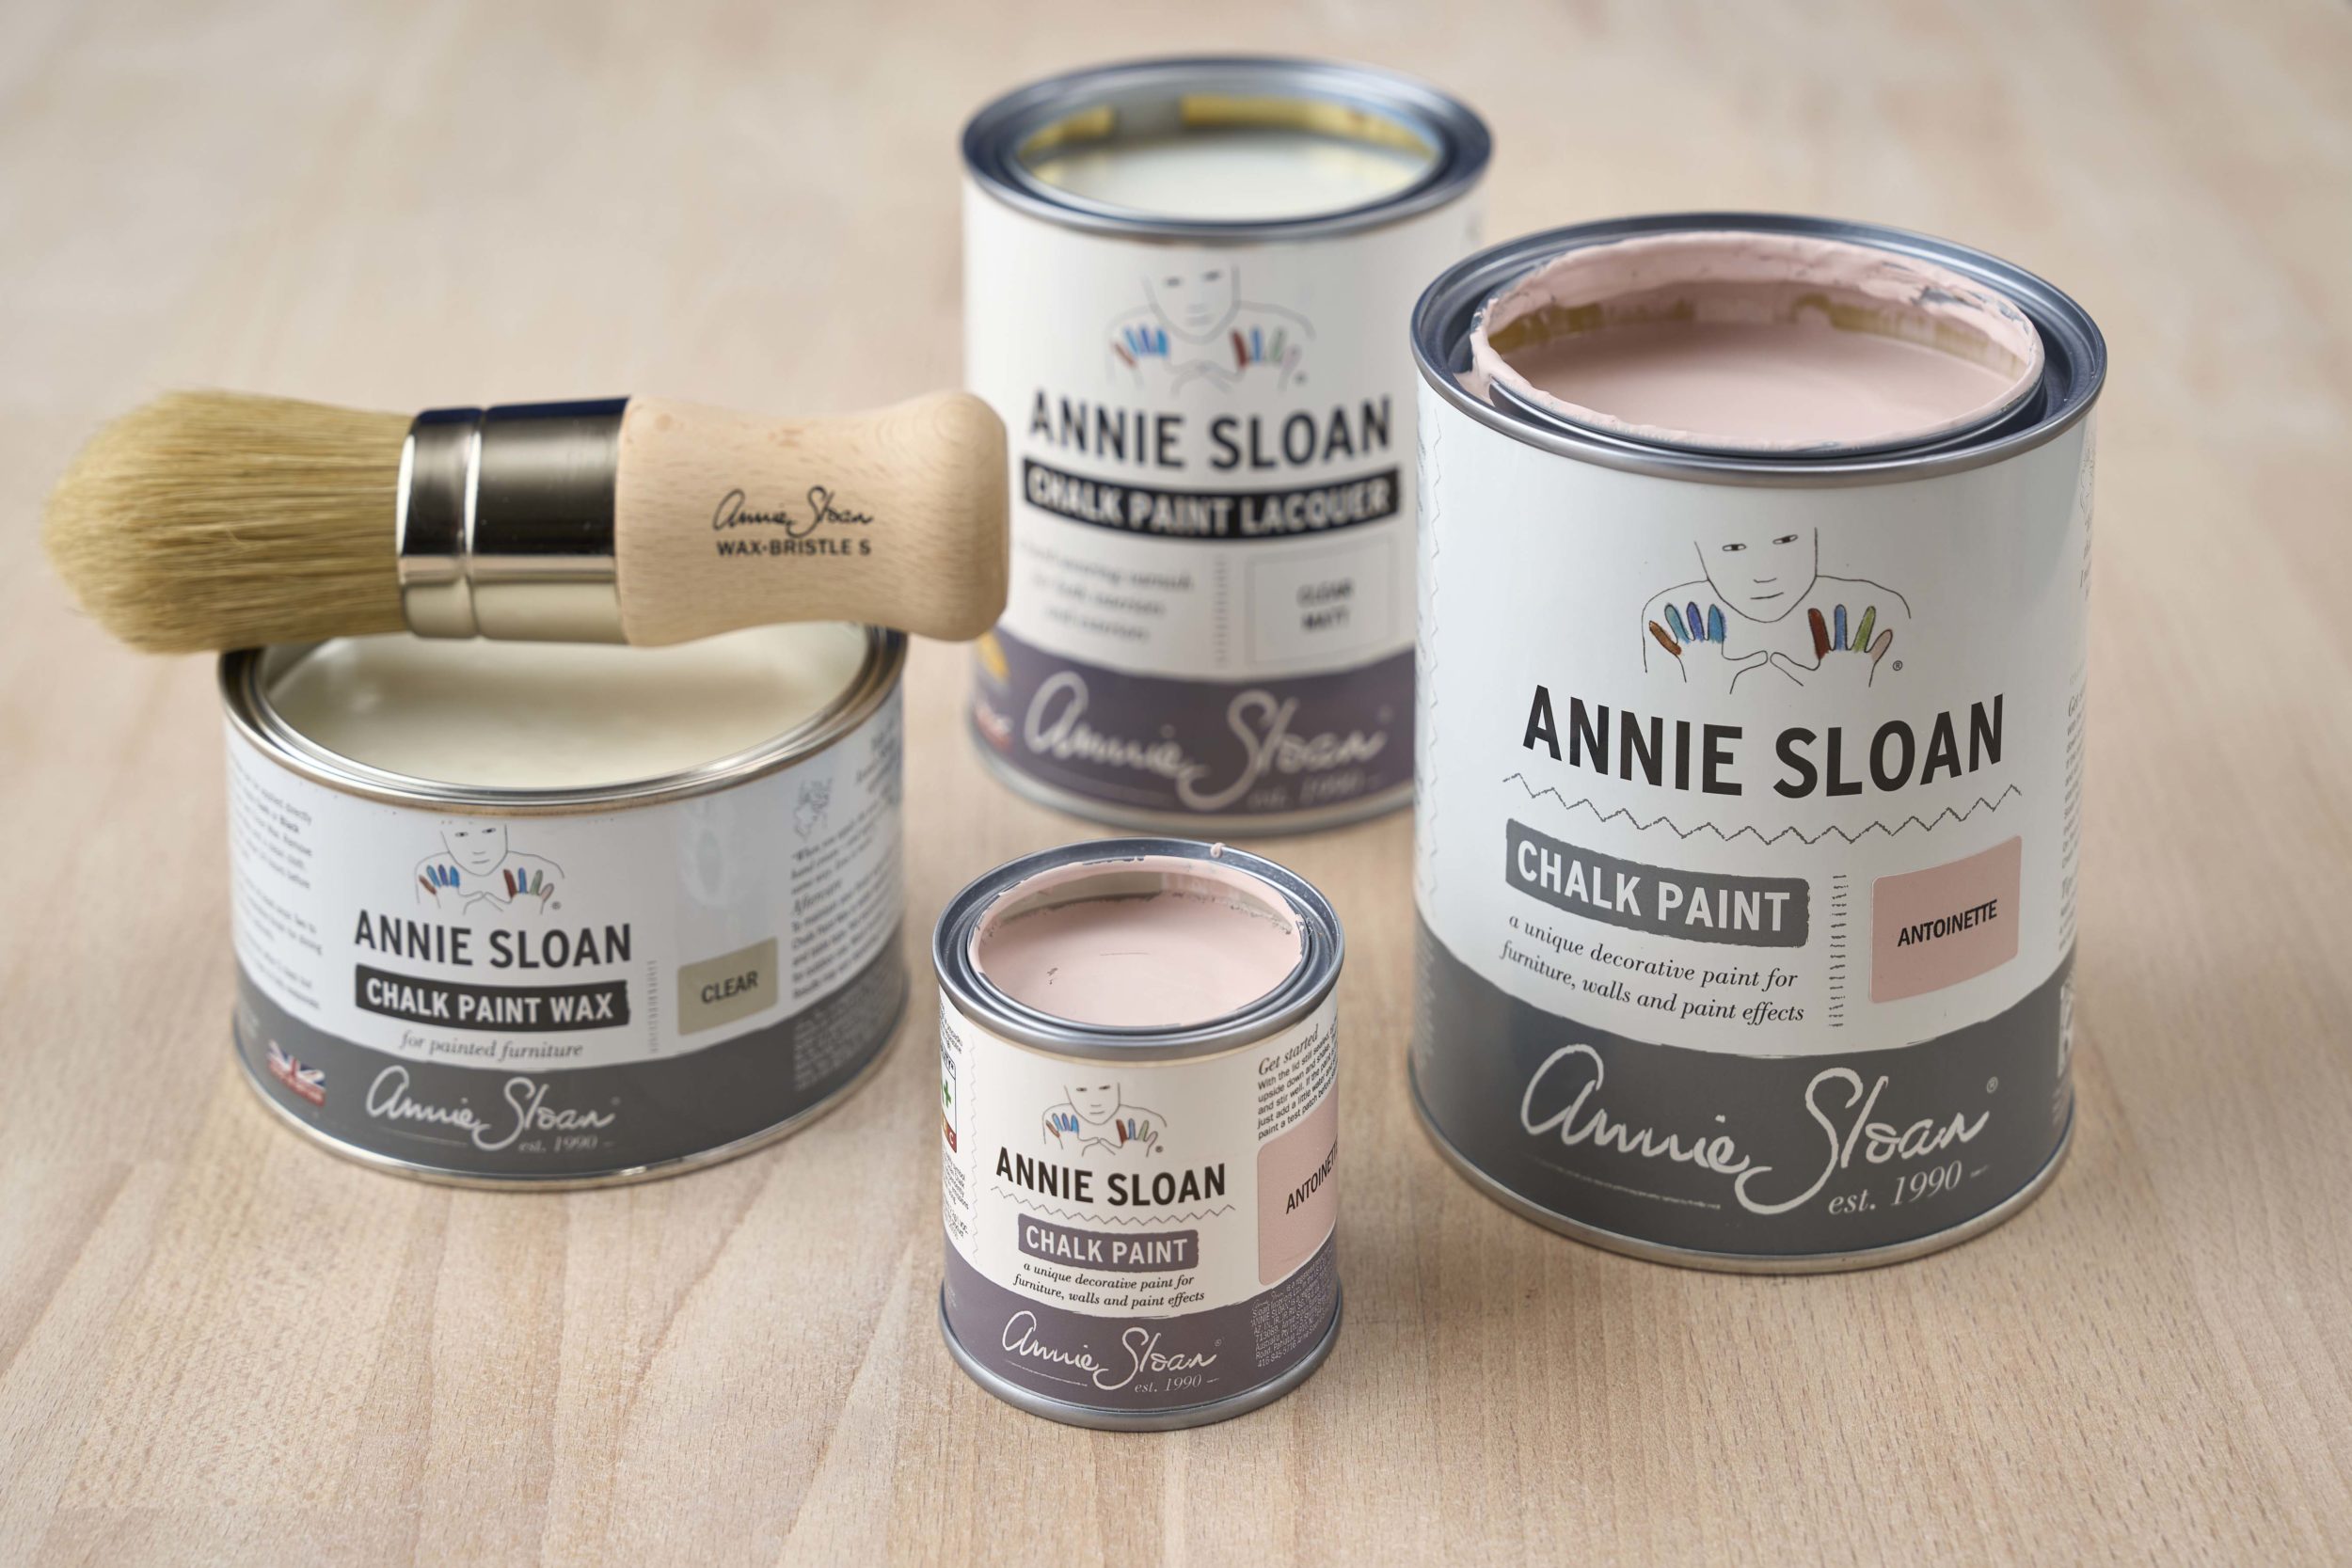 Group Shot of Annie Sloan Chalk Paint, Wax, and Lacquer